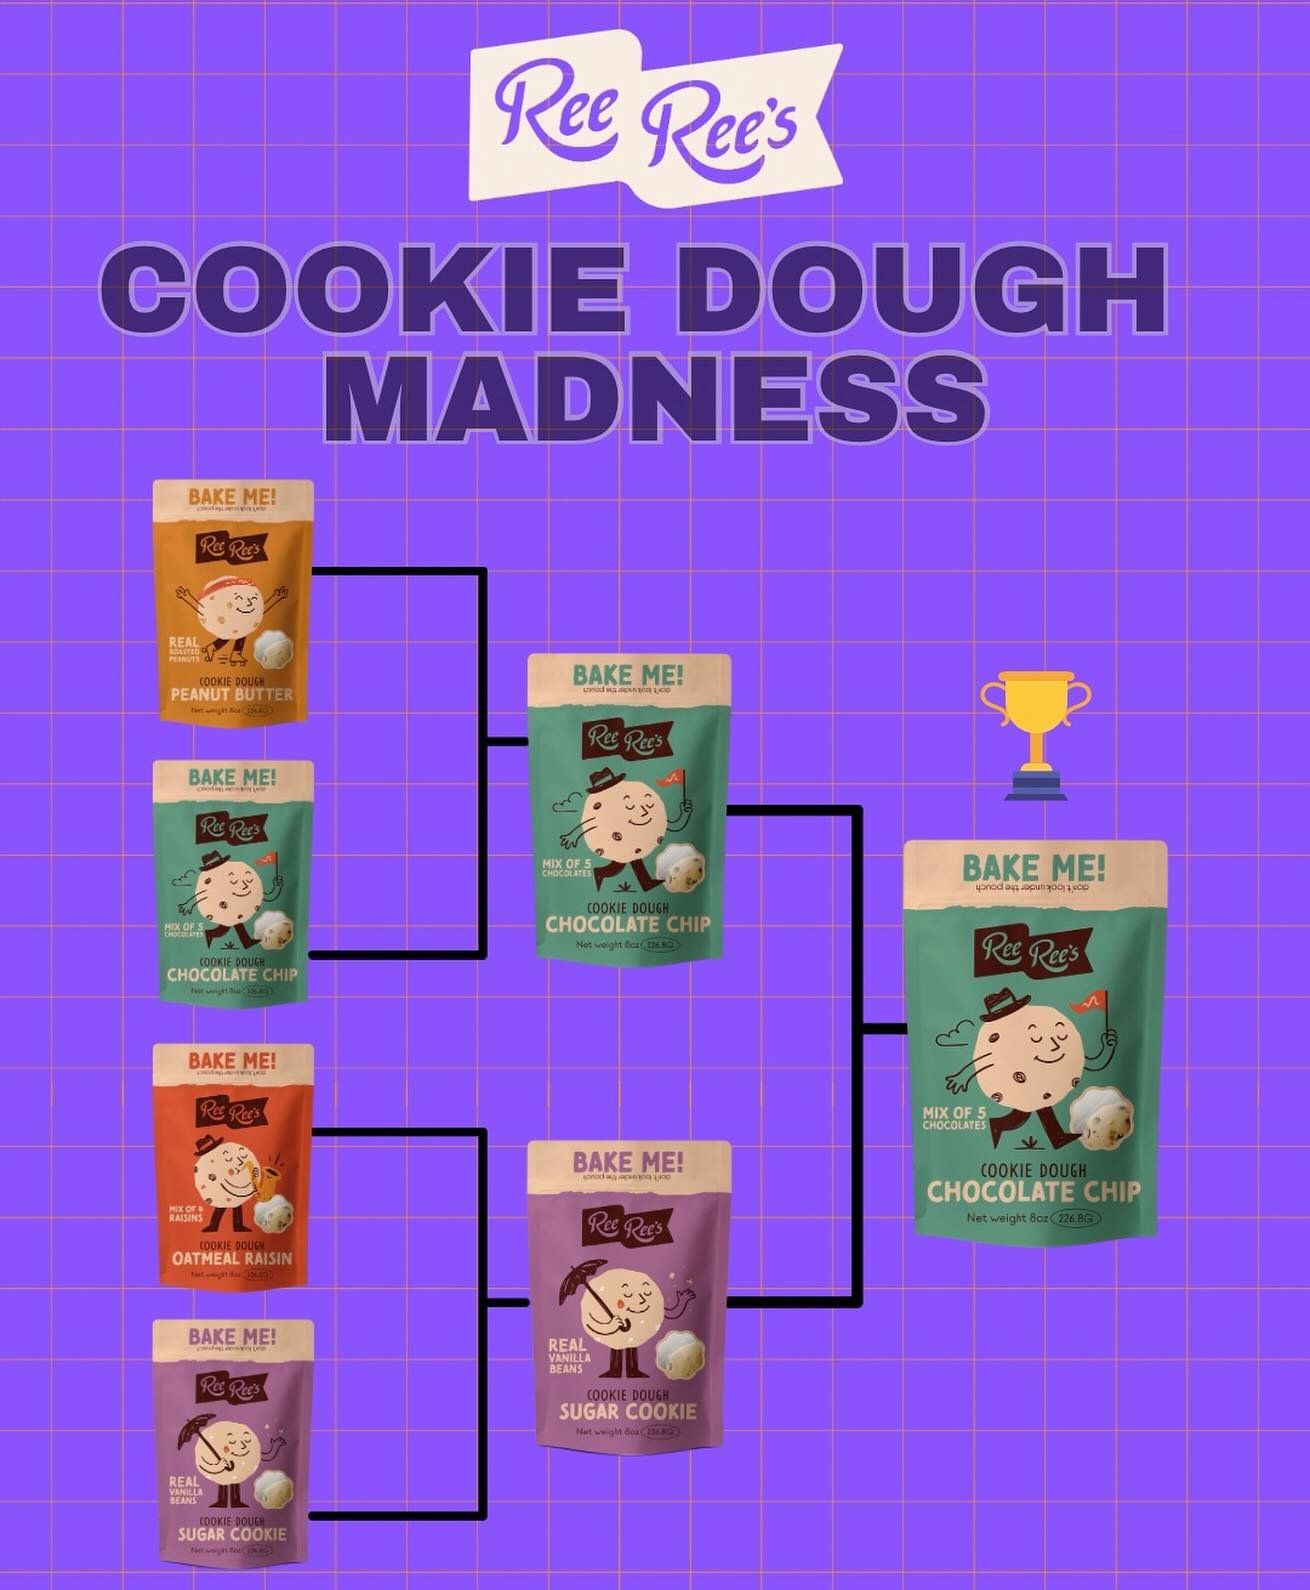 Drum roll pls 🥁

Our Cookie Dough Madness results are in from last week&rsquo;s stories, and the winner is&hellip;

CHOCOLATE CHIP! 🏆 (but are we even surprised lol 😝)

#reereesdough #reereescookiedough#frozencookiedough #cookiedoughballs #cookies